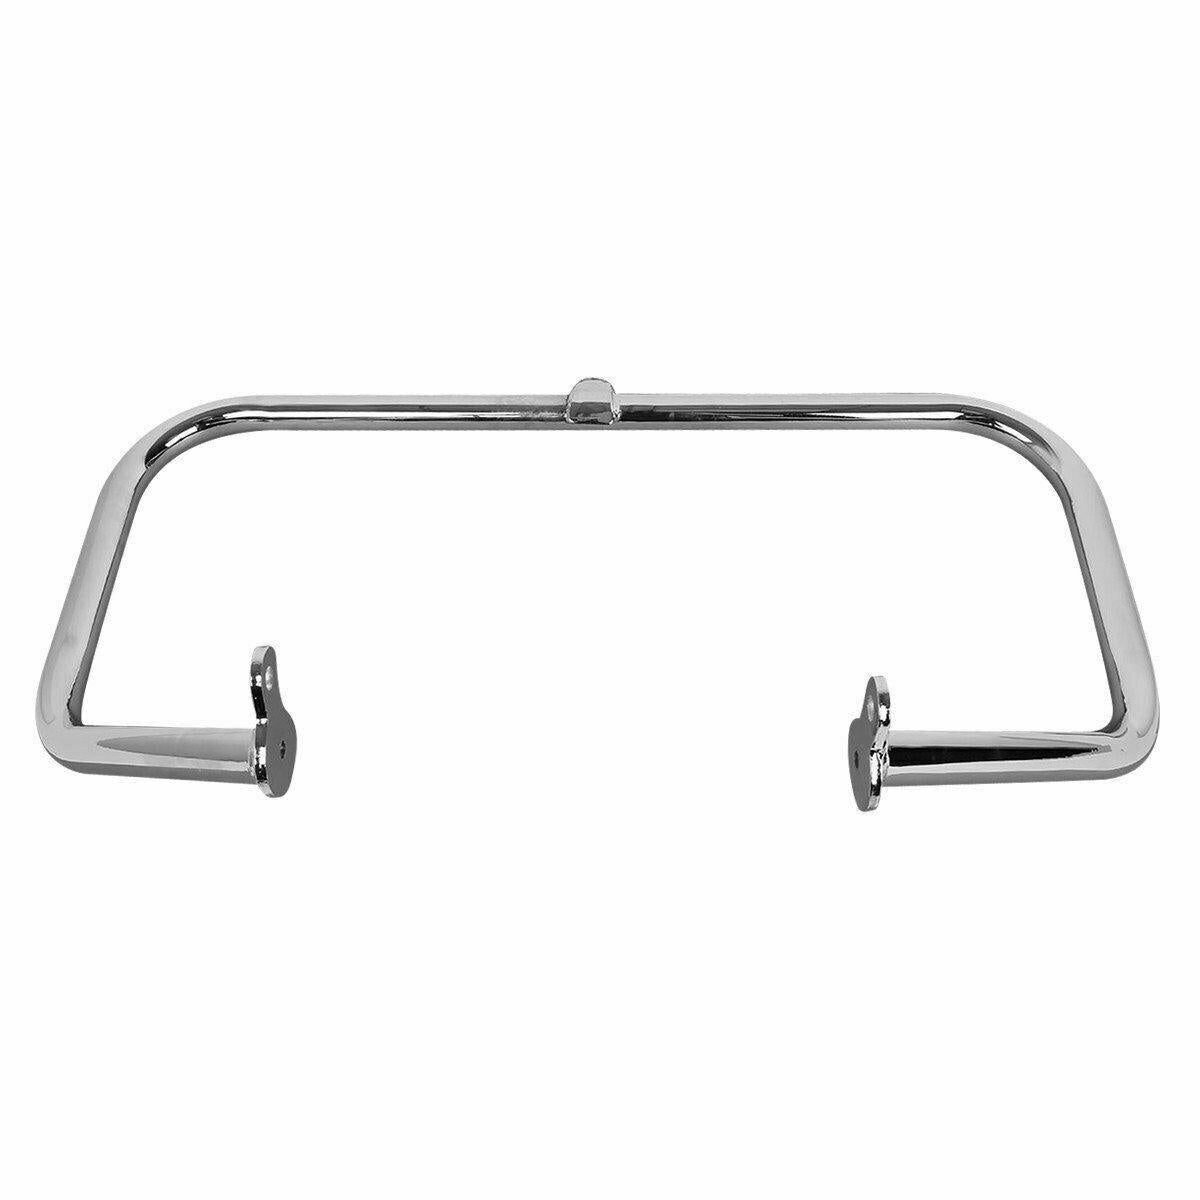 1 1/4" Highway Engine Guard Crash Bar For Harley Touring Road Street Glide 09-20 - Moto Life Products